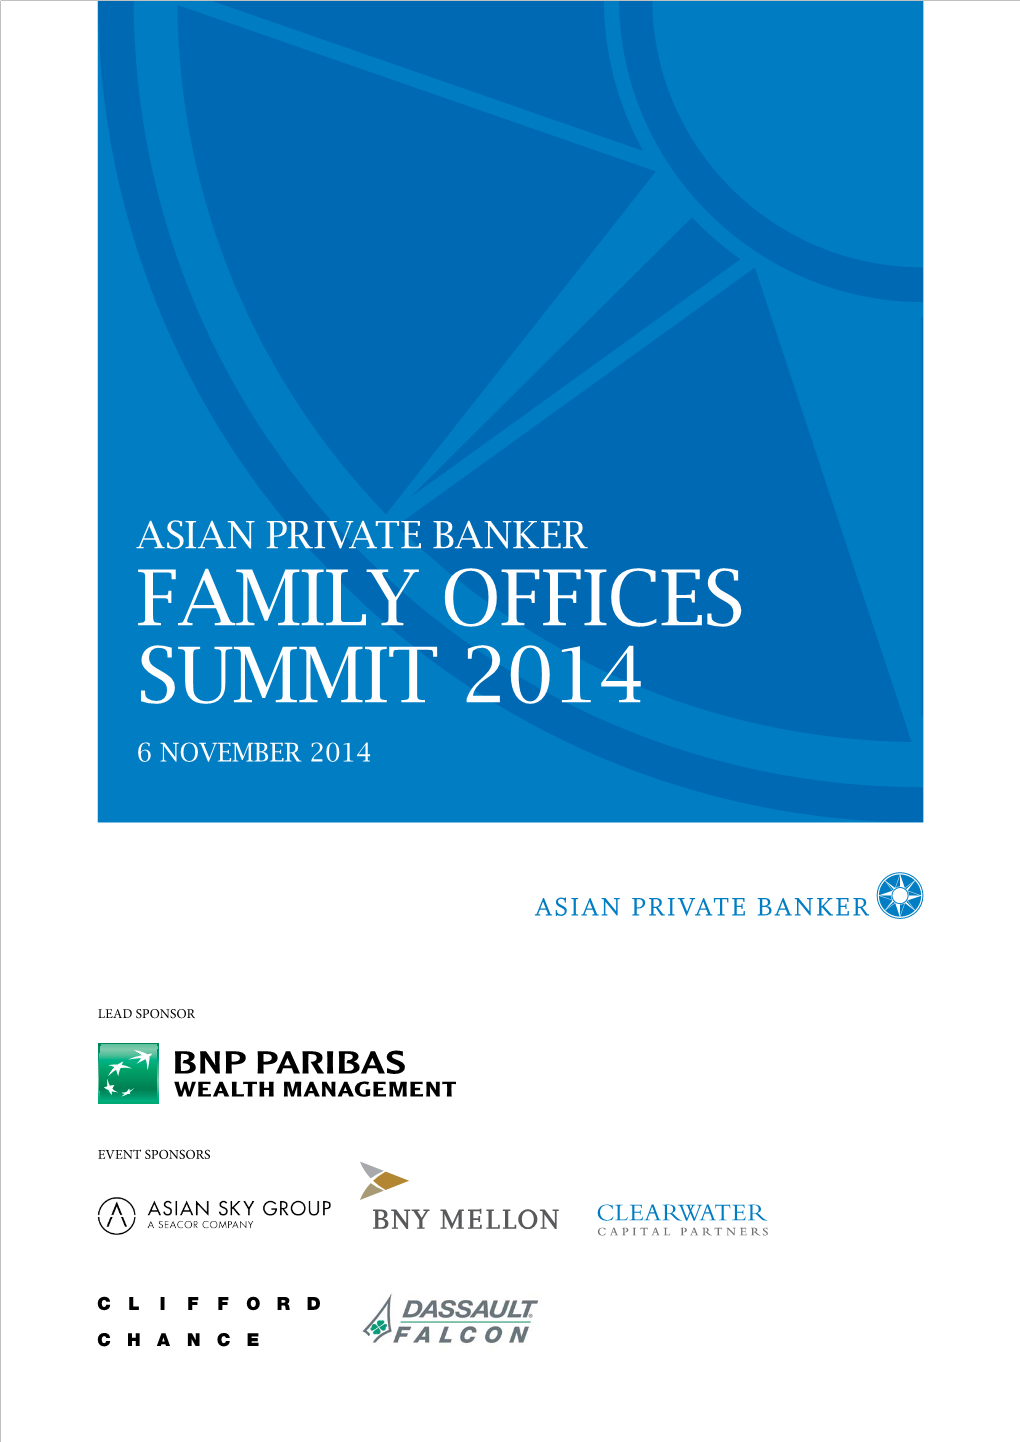 Family Offices Summit 2014 6 November 2014